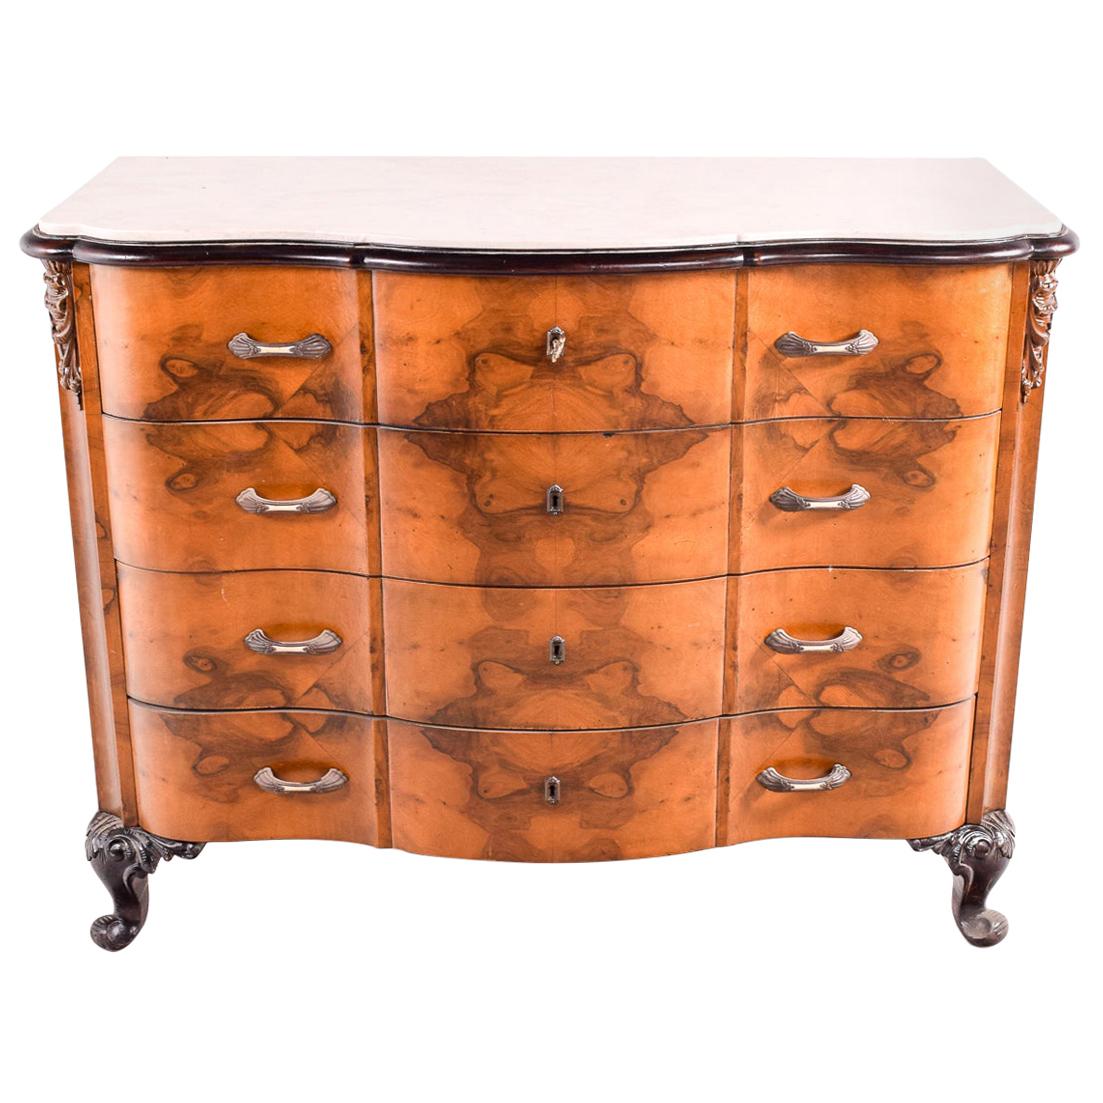 English Walnut Marble-Top Serpentine Commode